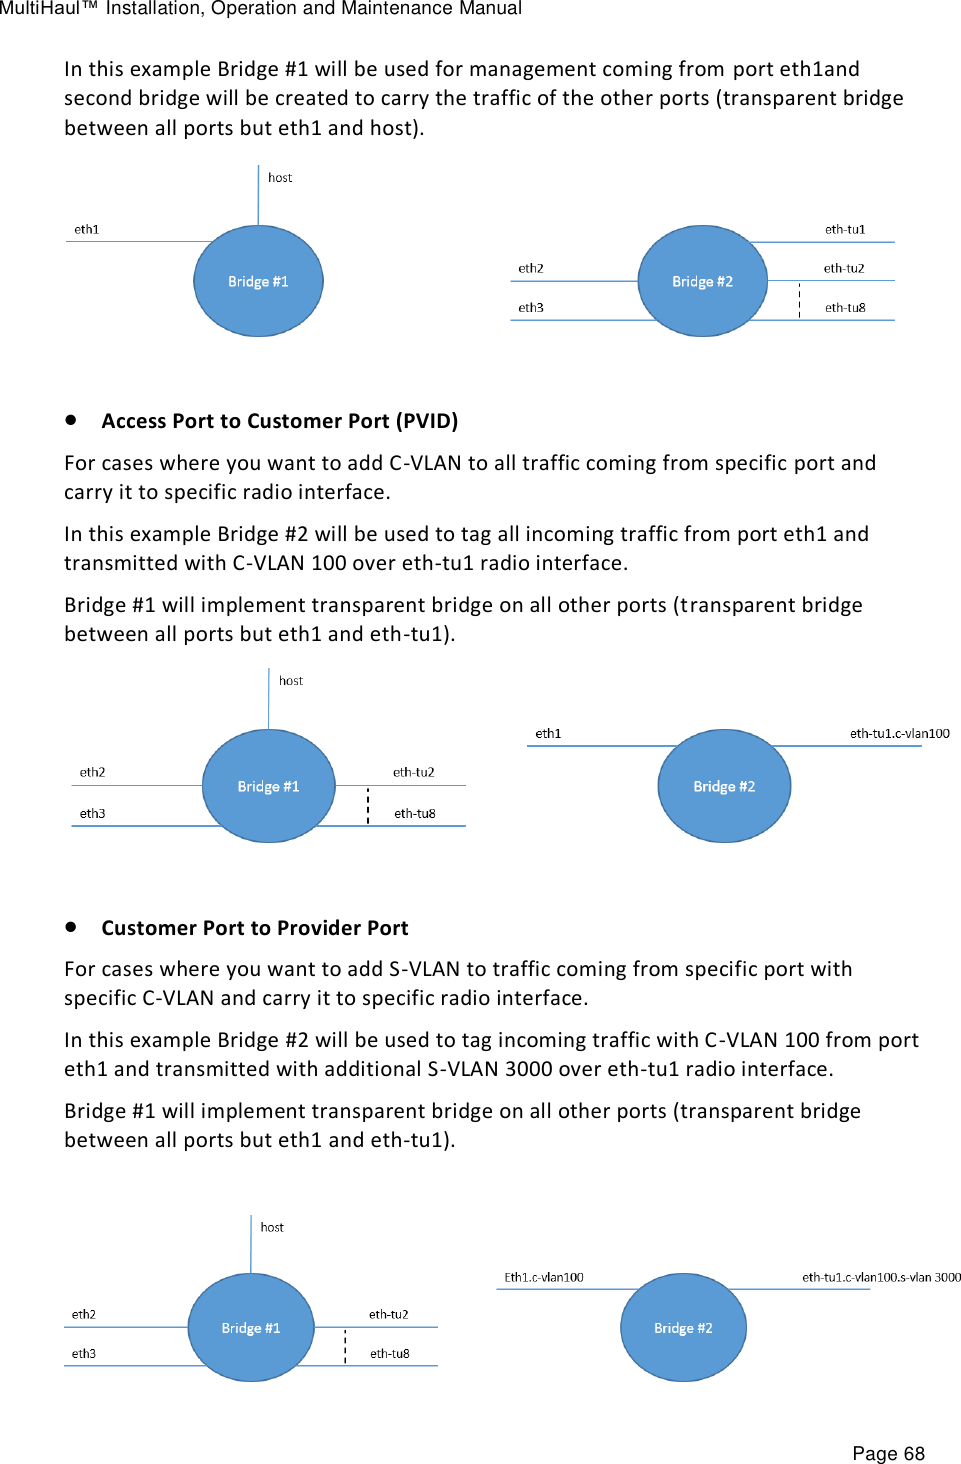 MultiHaul™ Installation, Operation and Maintenance Manual Page 68 In this example Bridge #1 will be used for management coming from port eth1and second bridge will be created to carry the traffic of the other ports (transparent bridge between all ports but eth1 and host).    Access Port to Customer Port (PVID) For cases where you want to add C-VLAN to all traffic coming from specific port and carry it to specific radio interface. In this example Bridge #2 will be used to tag all incoming traffic from port eth1 and transmitted with C-VLAN 100 over eth-tu1 radio interface. Bridge #1 will implement transparent bridge on all other ports (transparent bridge between all ports but eth1 and eth-tu1).    Customer Port to Provider Port   For cases where you want to add S-VLAN to traffic coming from specific port with specific C-VLAN and carry it to specific radio interface. In this example Bridge #2 will be used to tag incoming traffic with C-VLAN 100 from port eth1 and transmitted with additional S-VLAN 3000 over eth-tu1 radio interface. Bridge #1 will implement transparent bridge on all other ports (transparent bridge between all ports but eth1 and eth-tu1).   